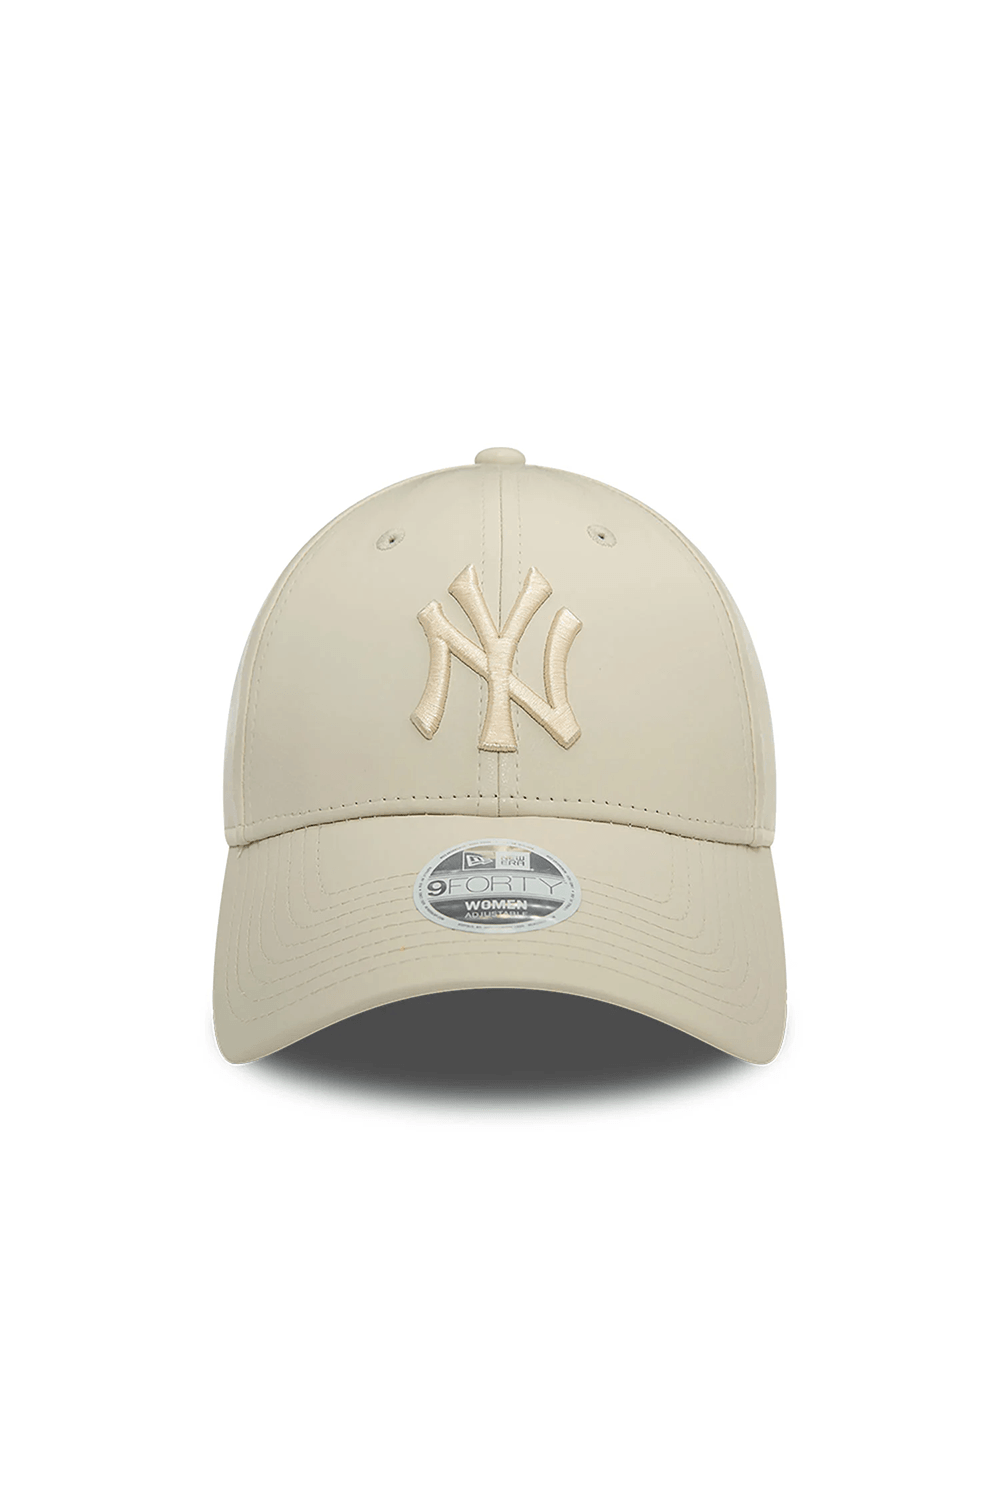 New Era | Yankees Faux Leather Womens Stone 9FORTY Adjustable Cap 1 | Milagron